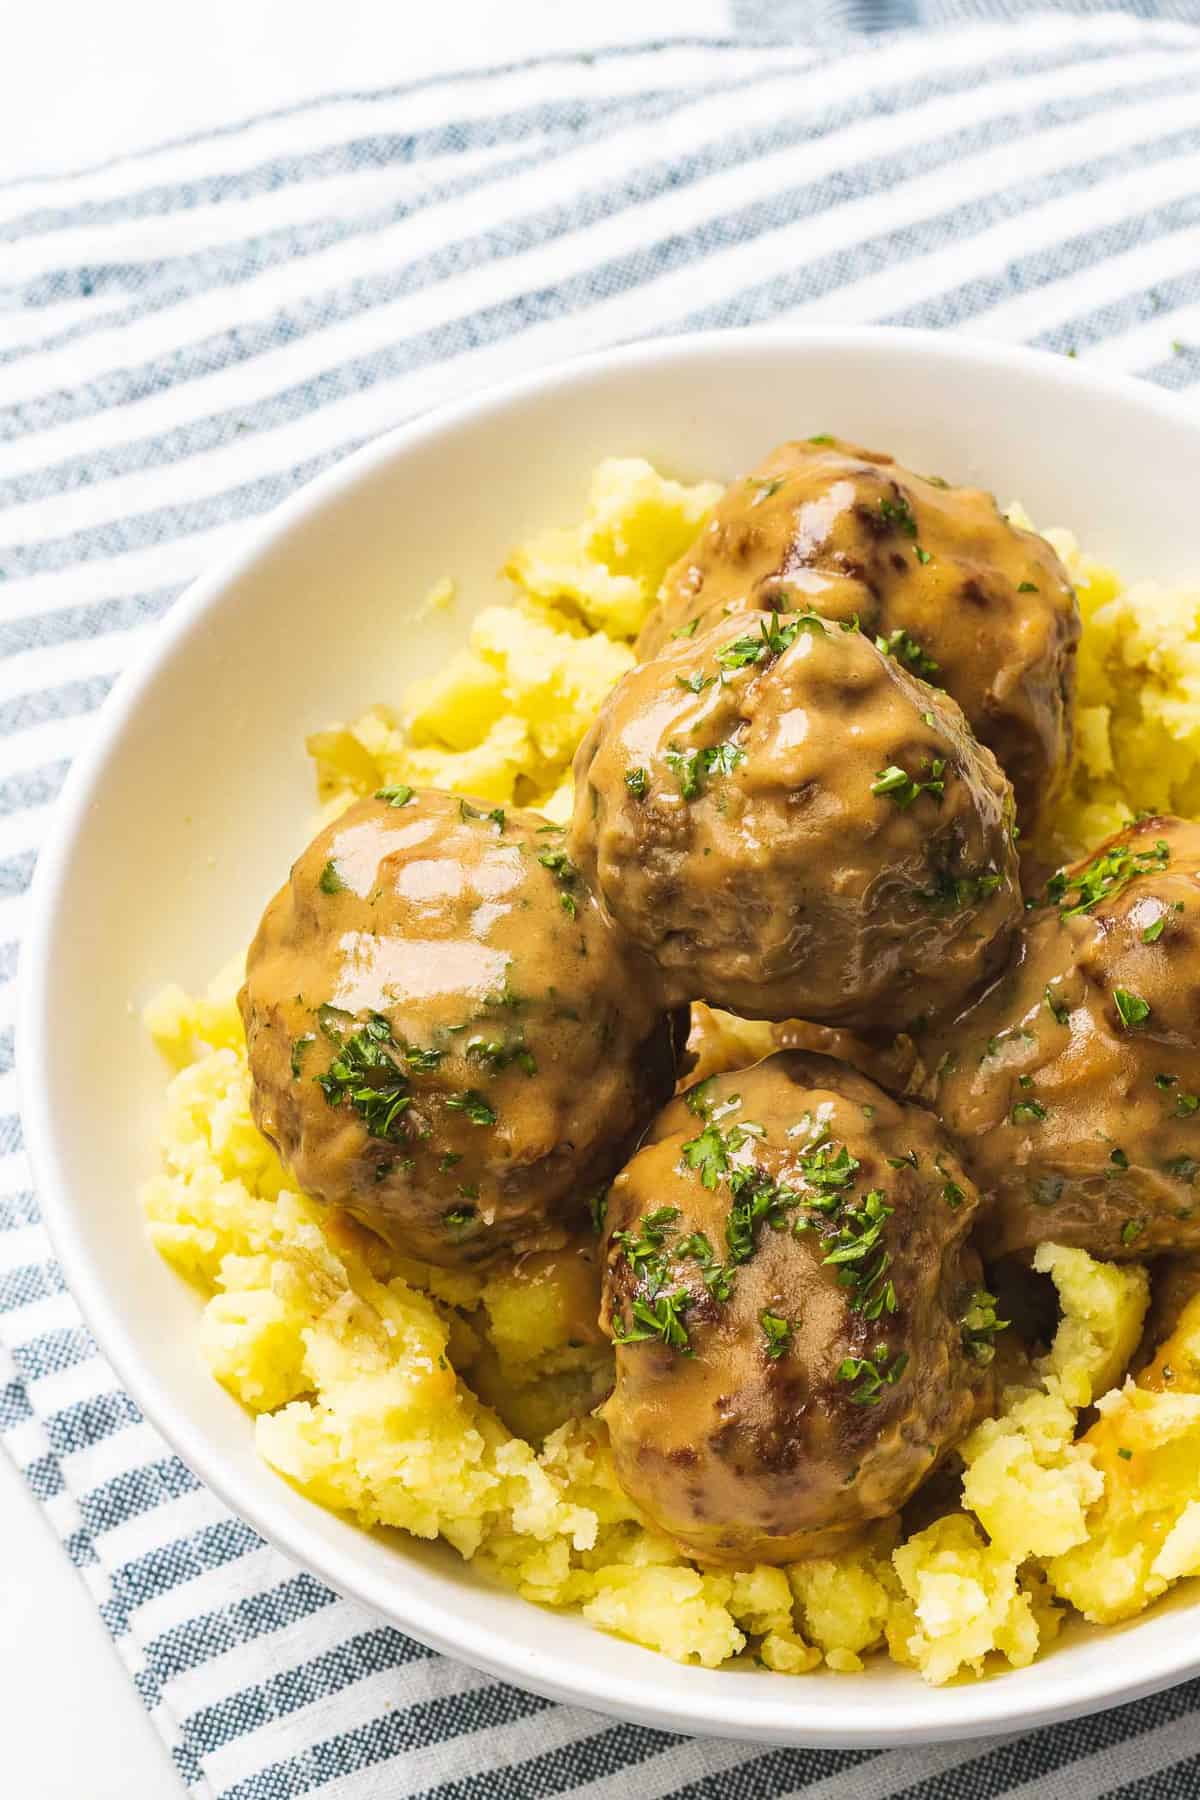 Swedish meatballs with gravy on top of mashed potatoes.